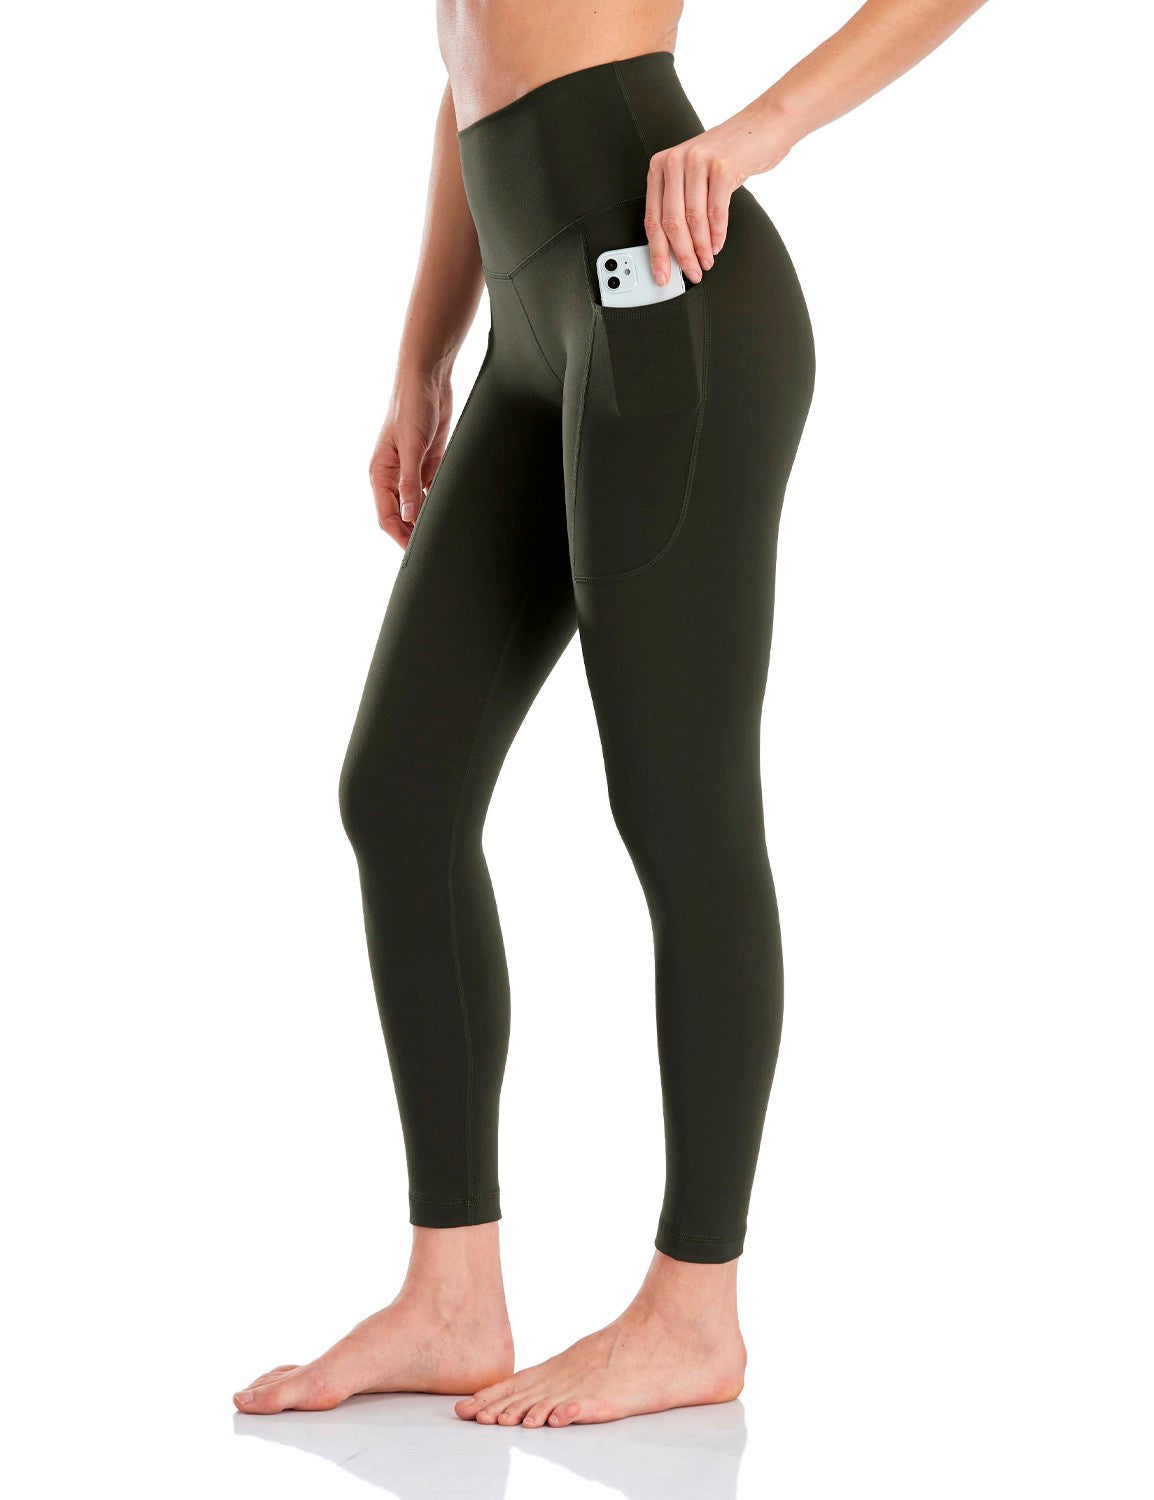 HeyNuts Essential/Workout Pro 7/8 Leggings, High India